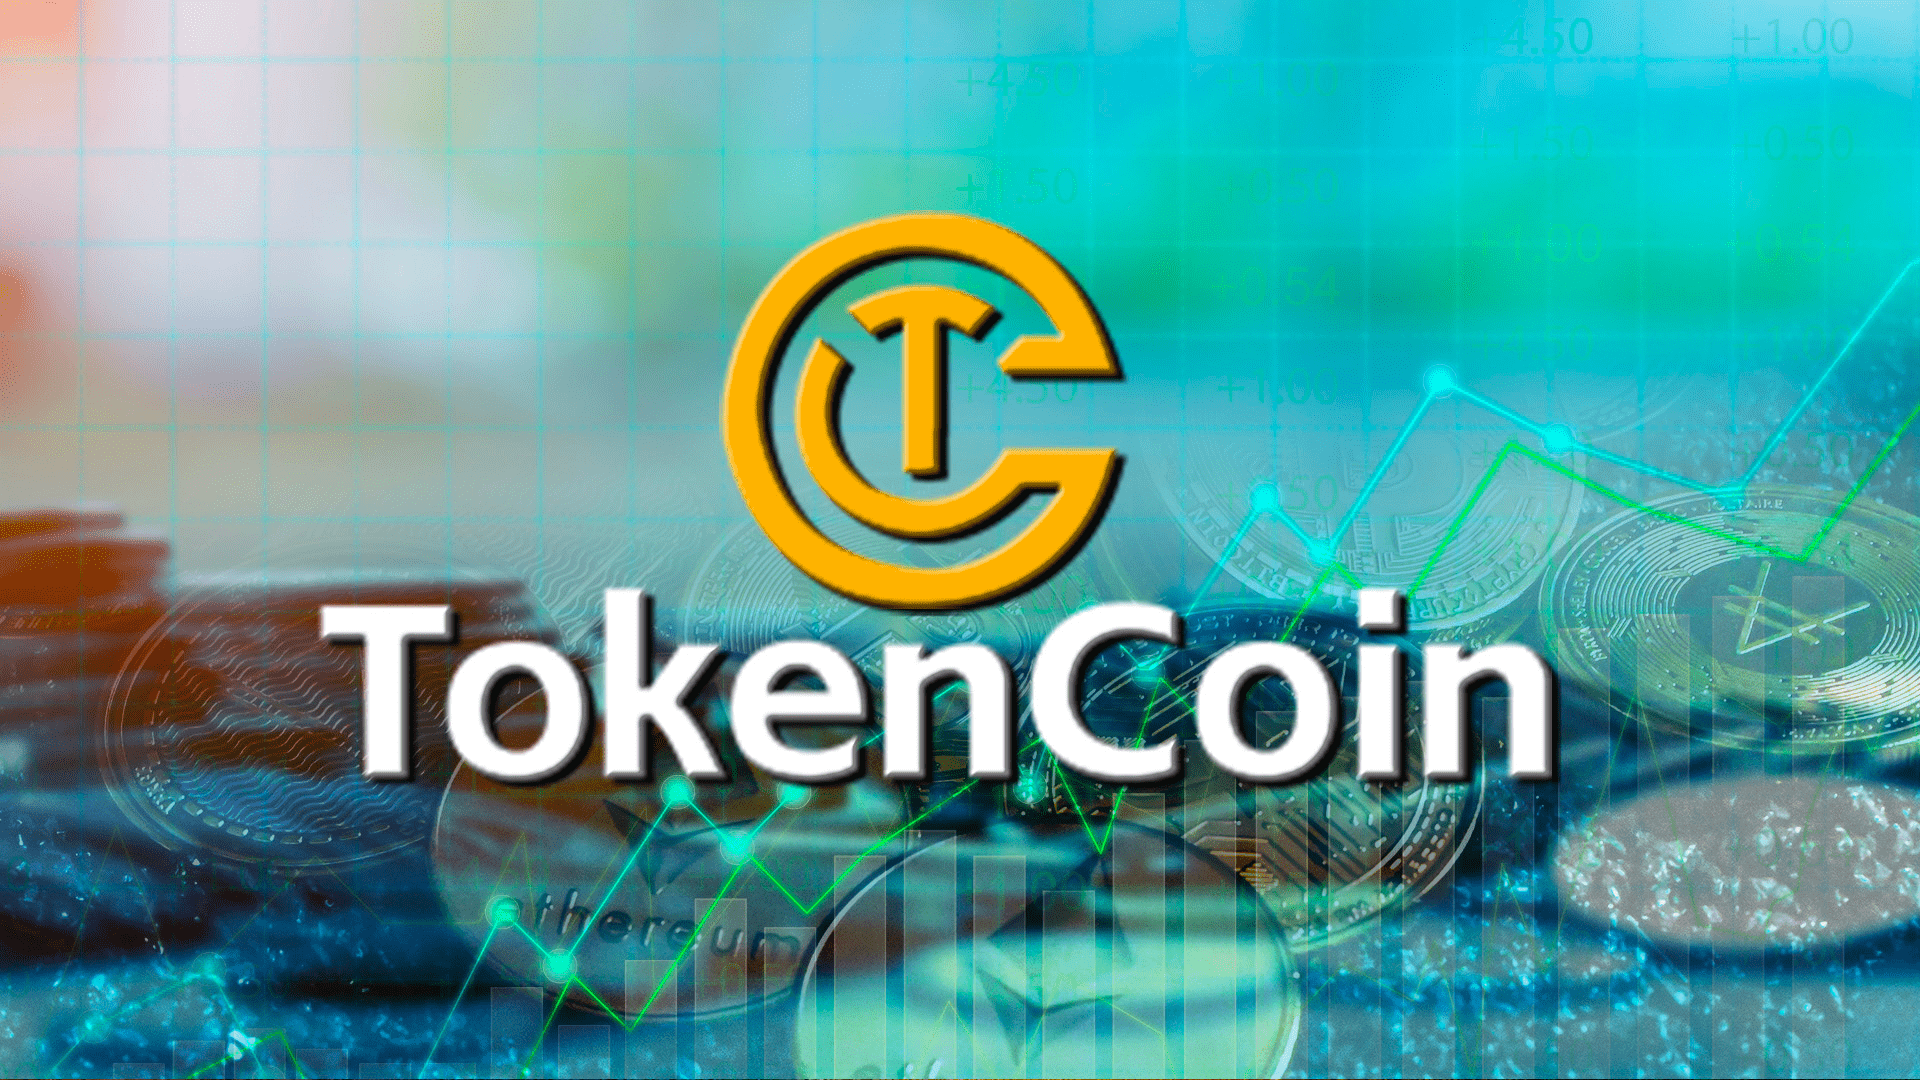 TokenCoin- A Cloud Mining Service Platform Harnessing Mining Machine Computing Power in the Latter Half of 2023